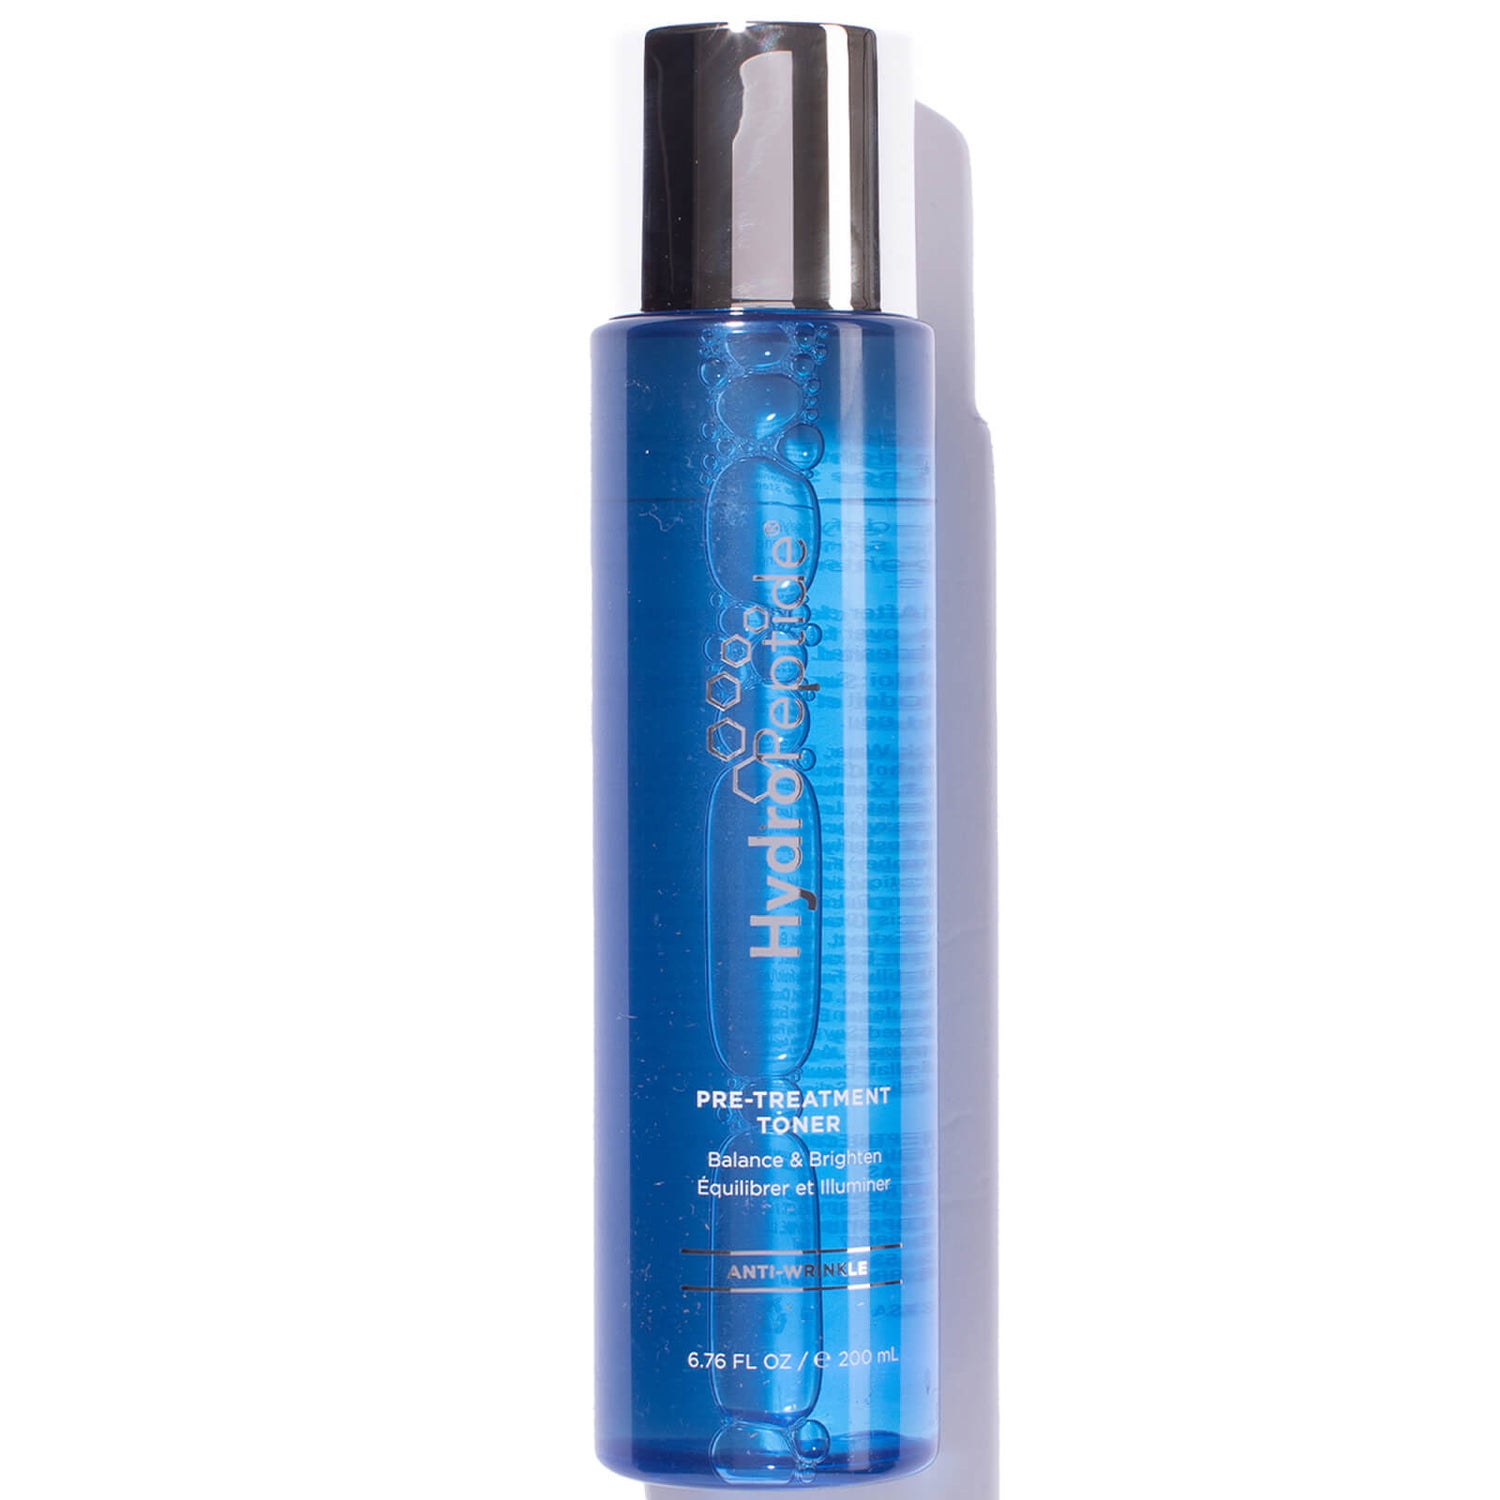 HydroPeptide Pre-Treatment Toner - Balance and Brighten - Anti-Wrinkle ...